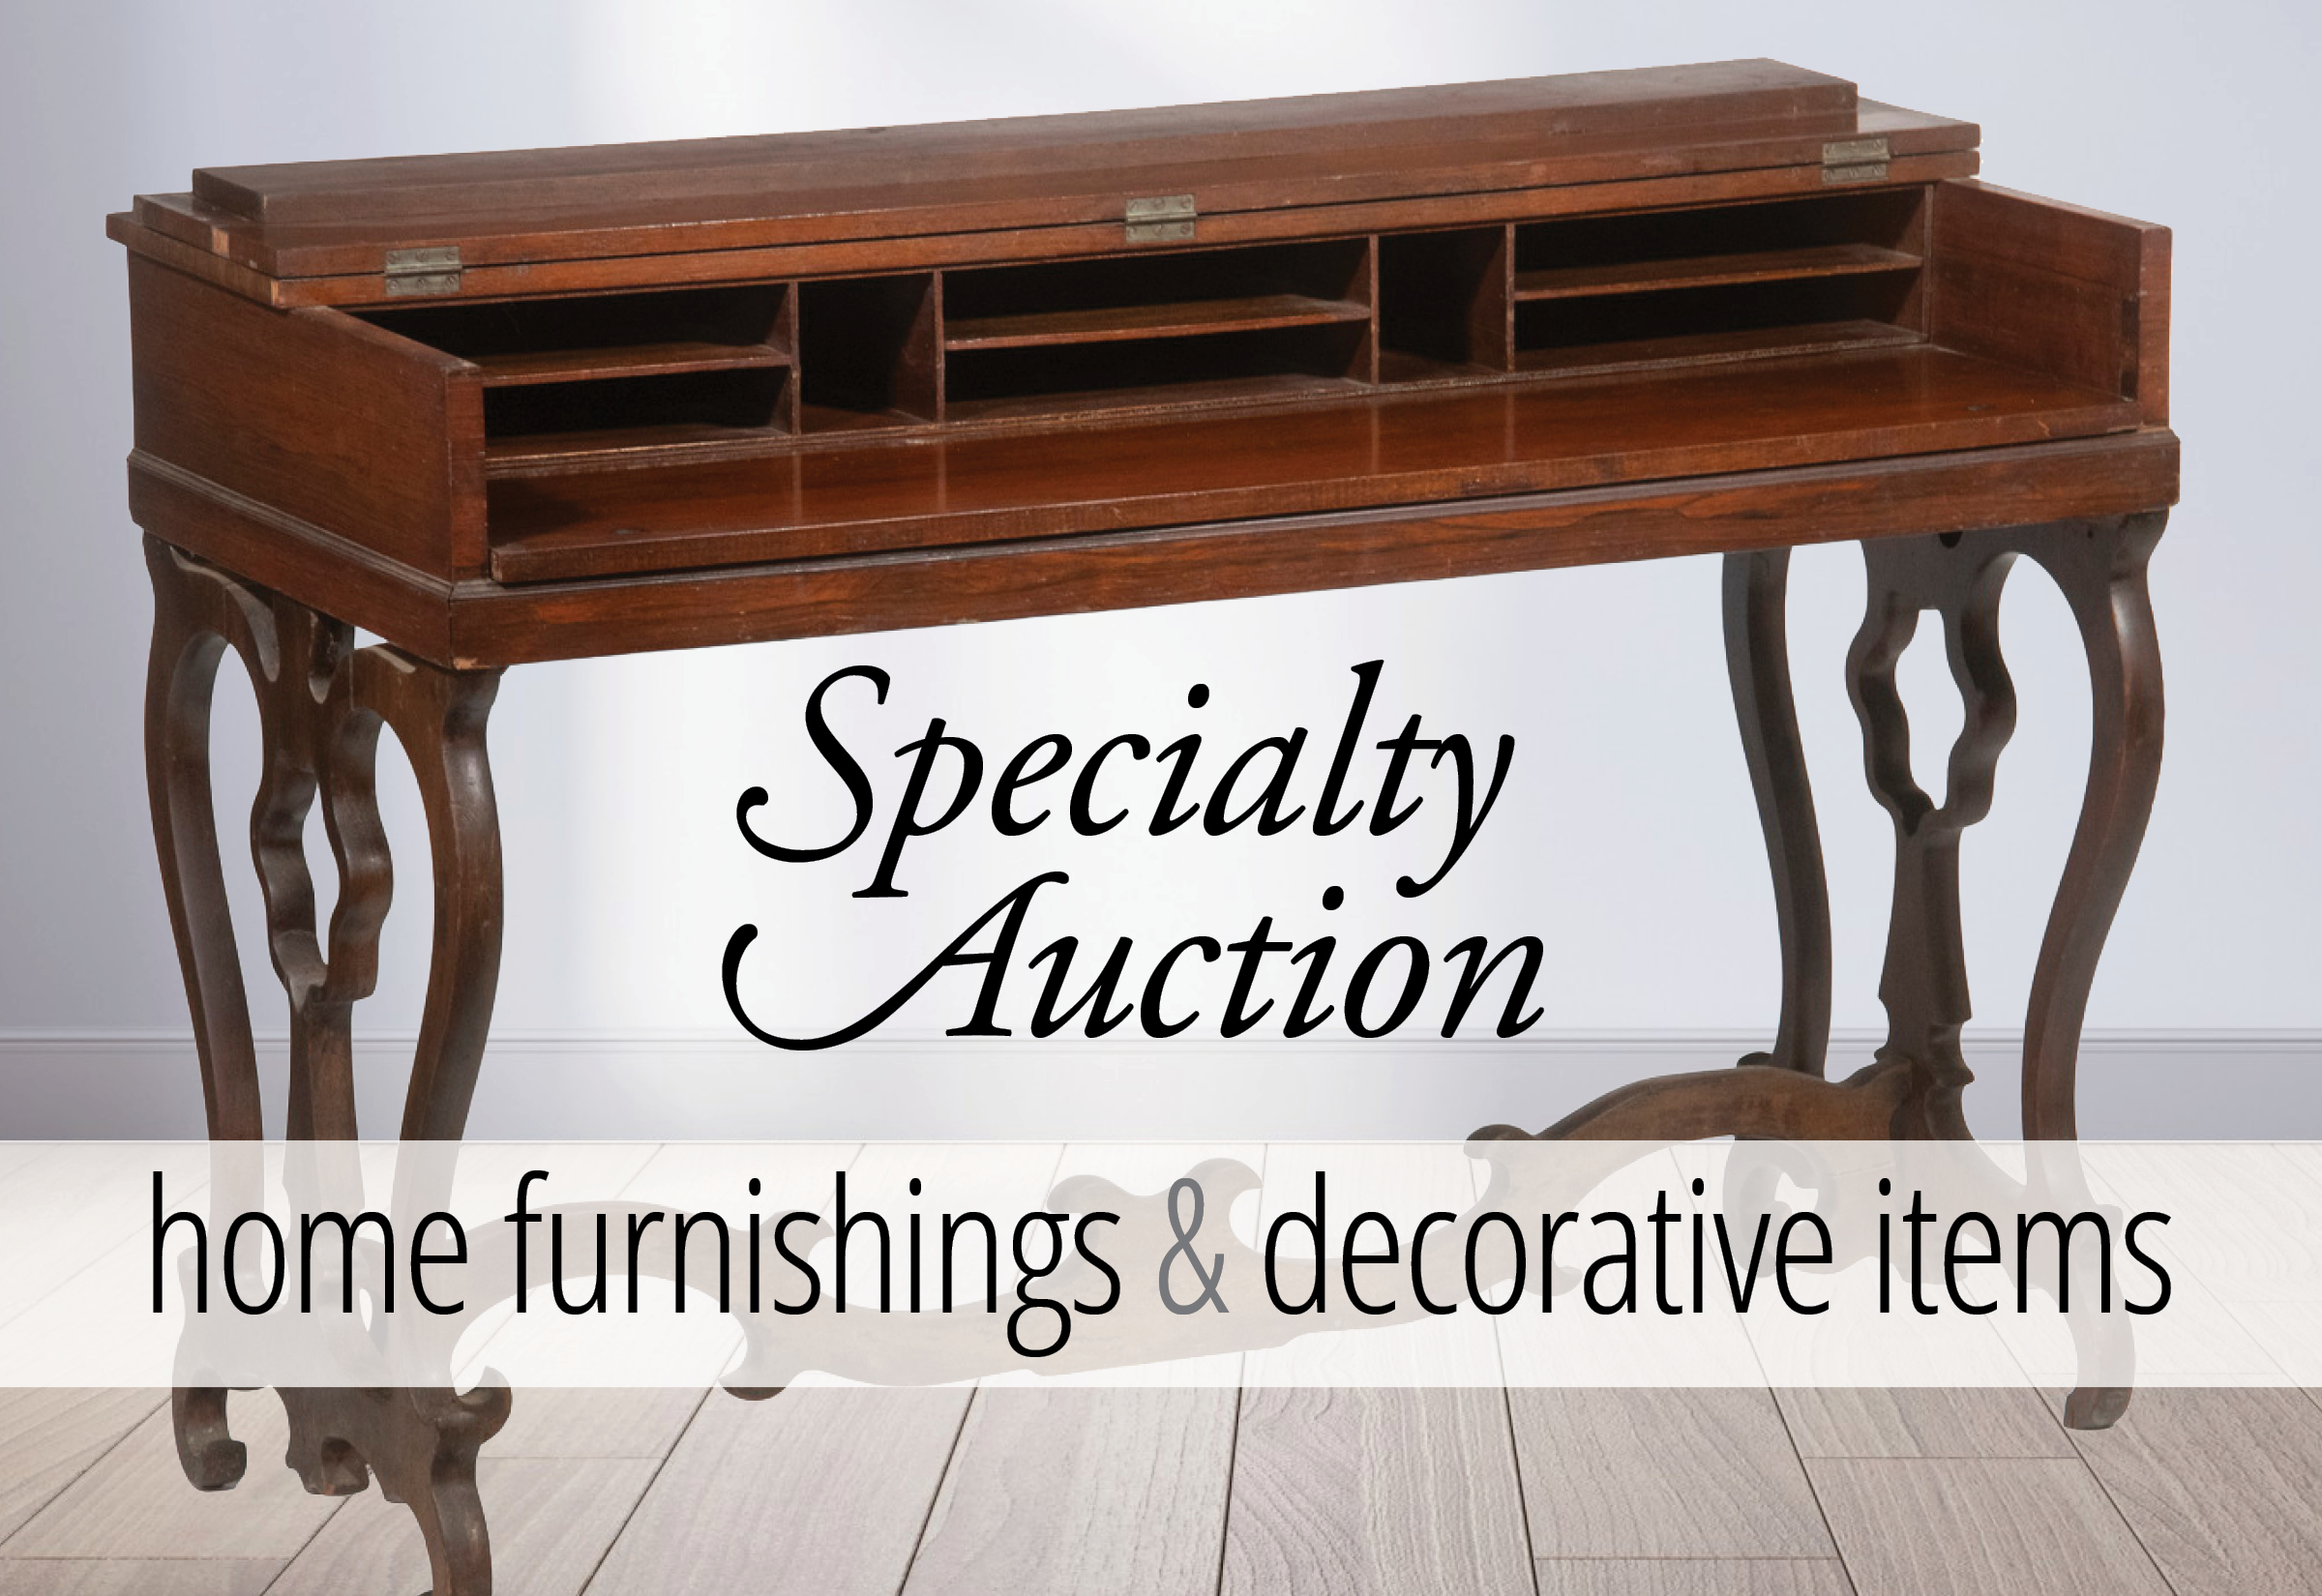 Home Decor & More - Specialty Auction